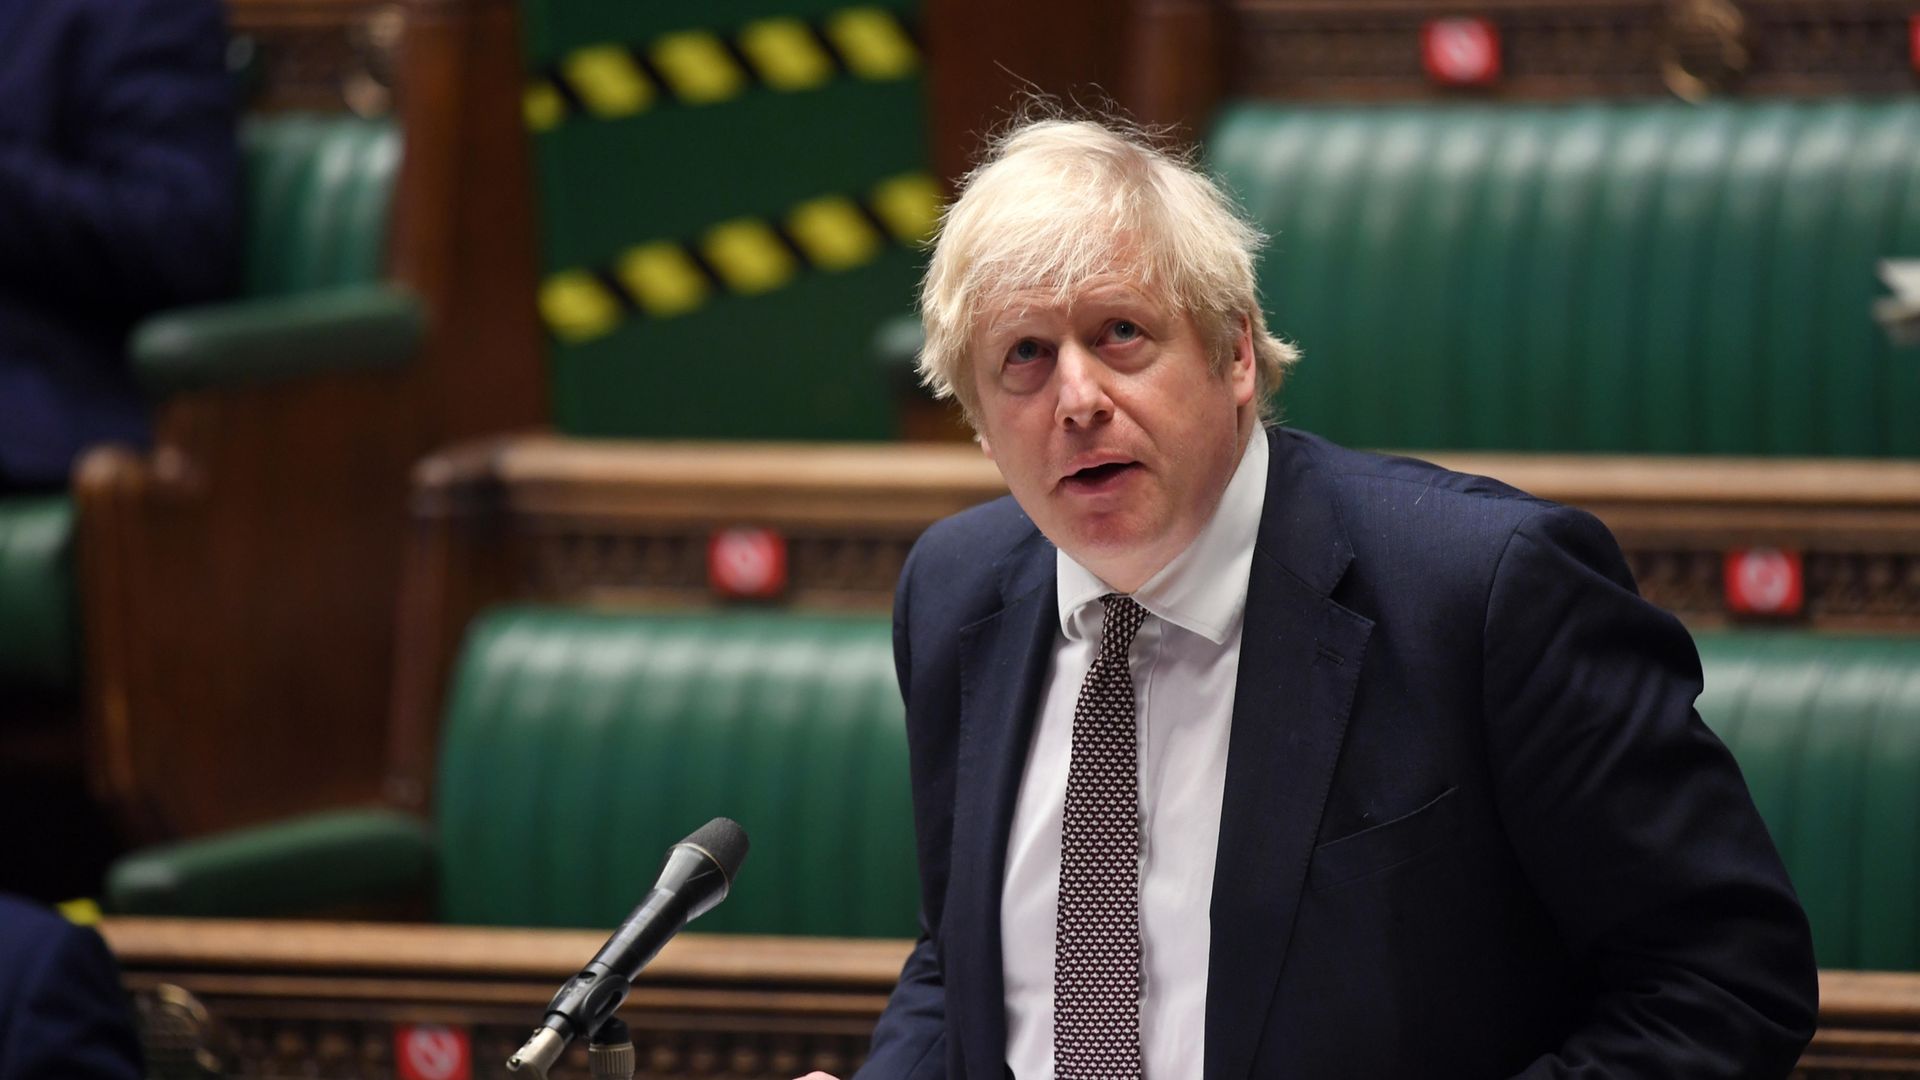 Boris Johnson in the House of Commons - Credit: Jessica Taylor/House of Commons